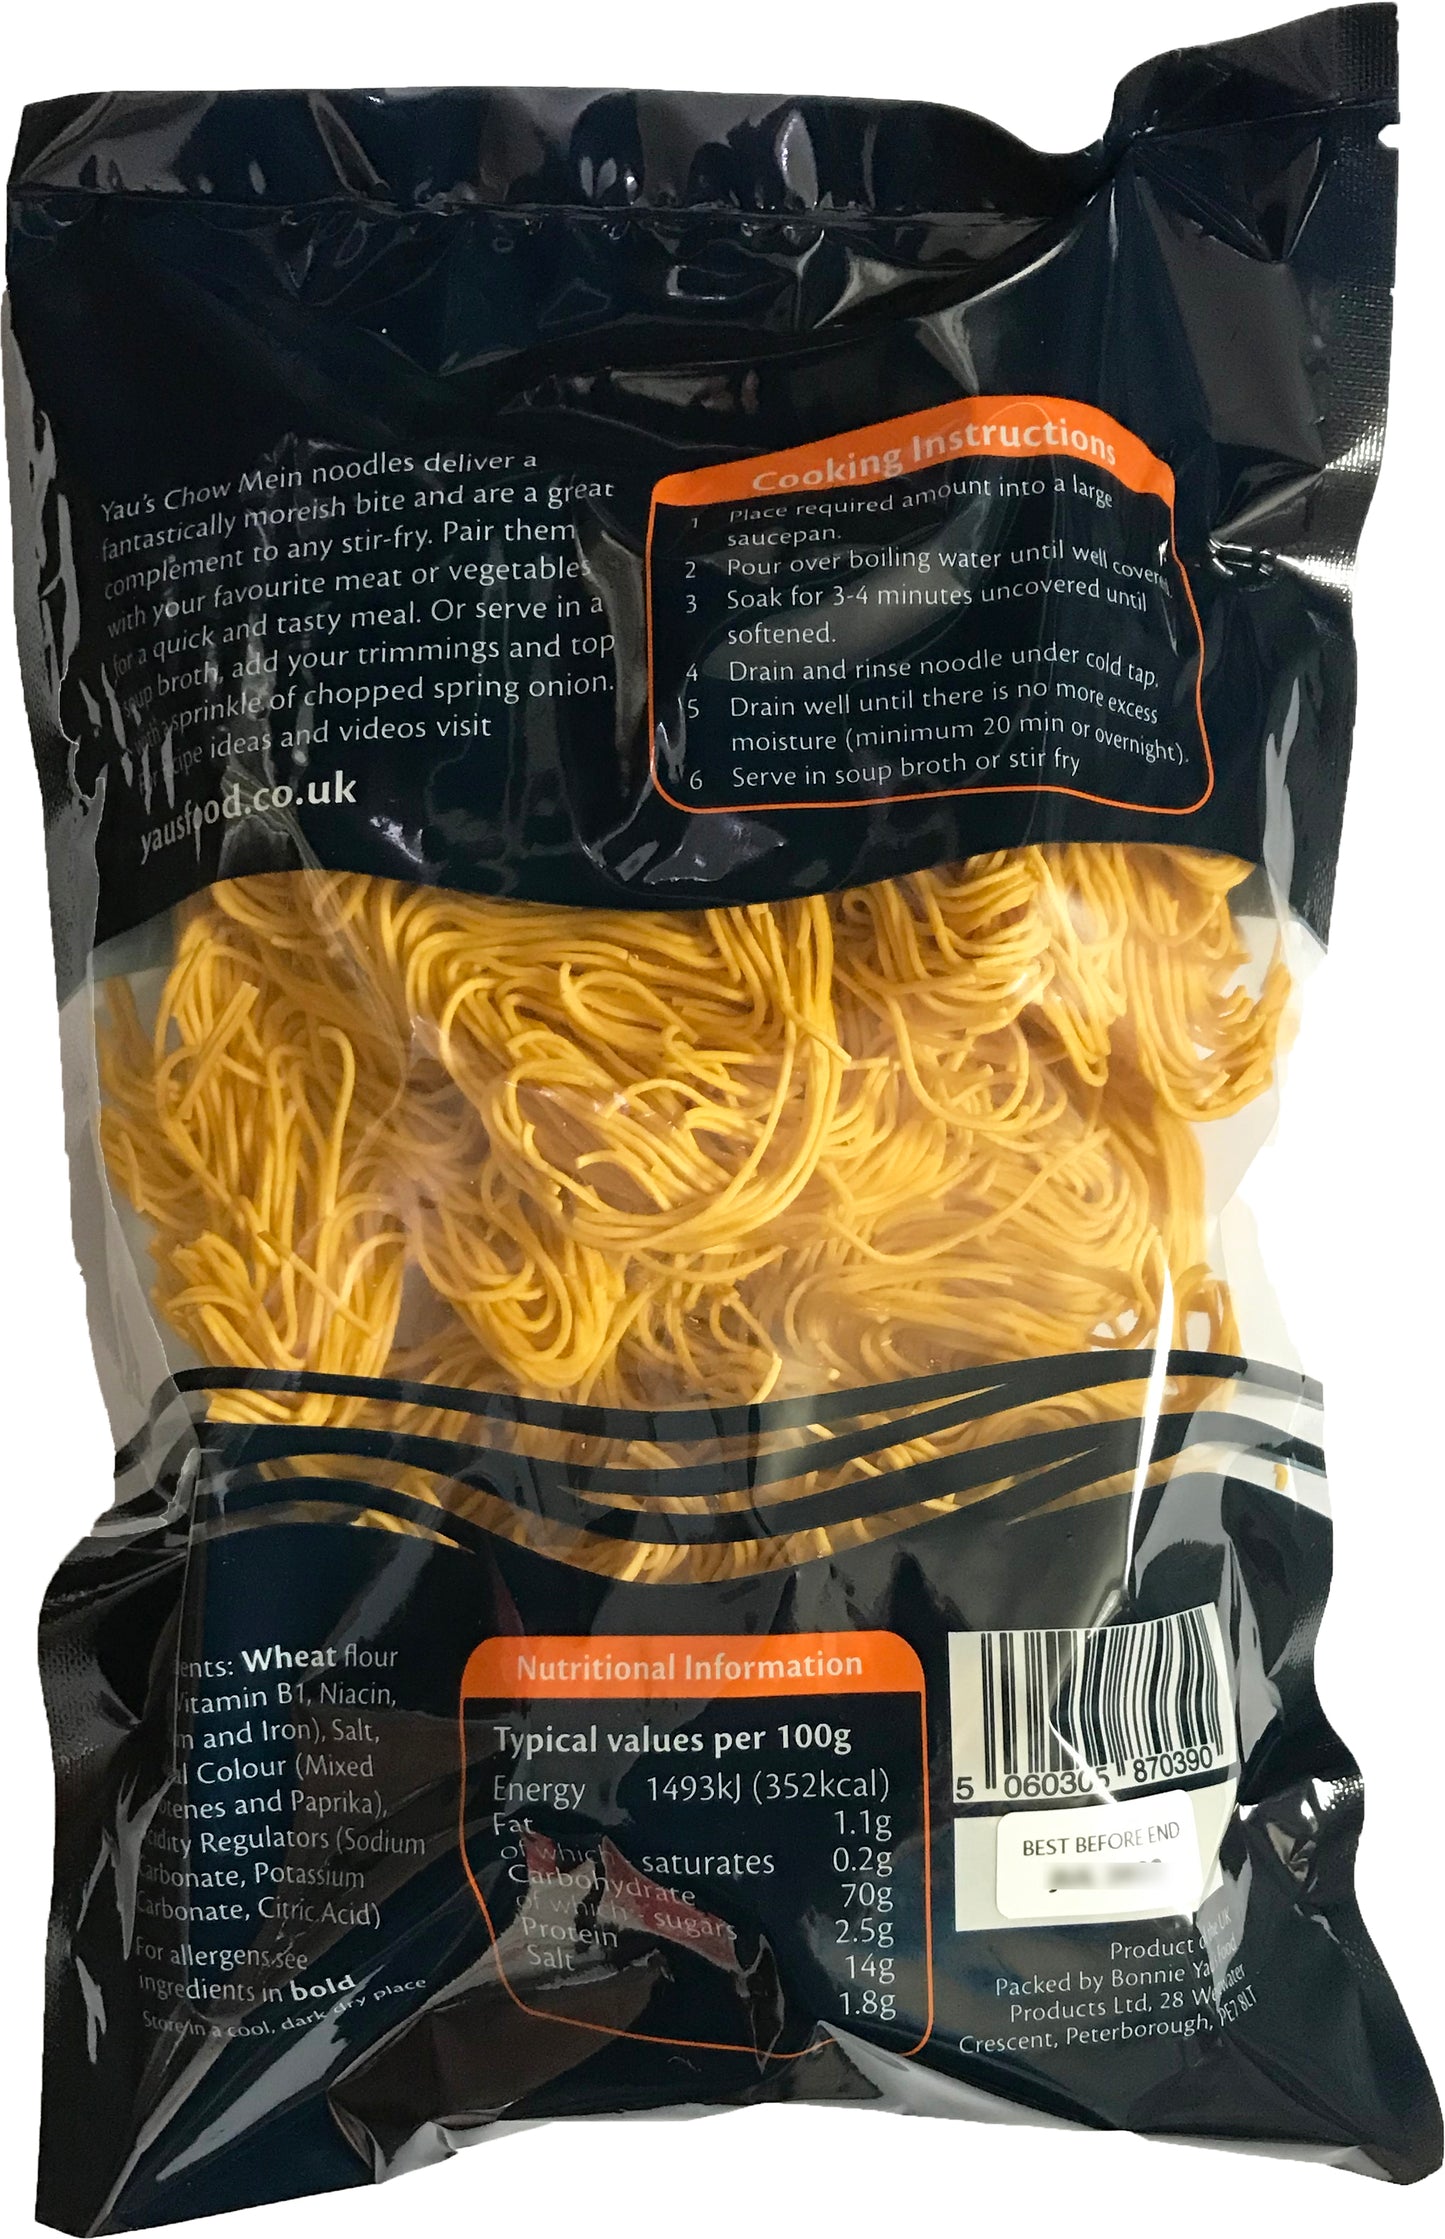 Yau's Thin Chow Mein Noodles 300g